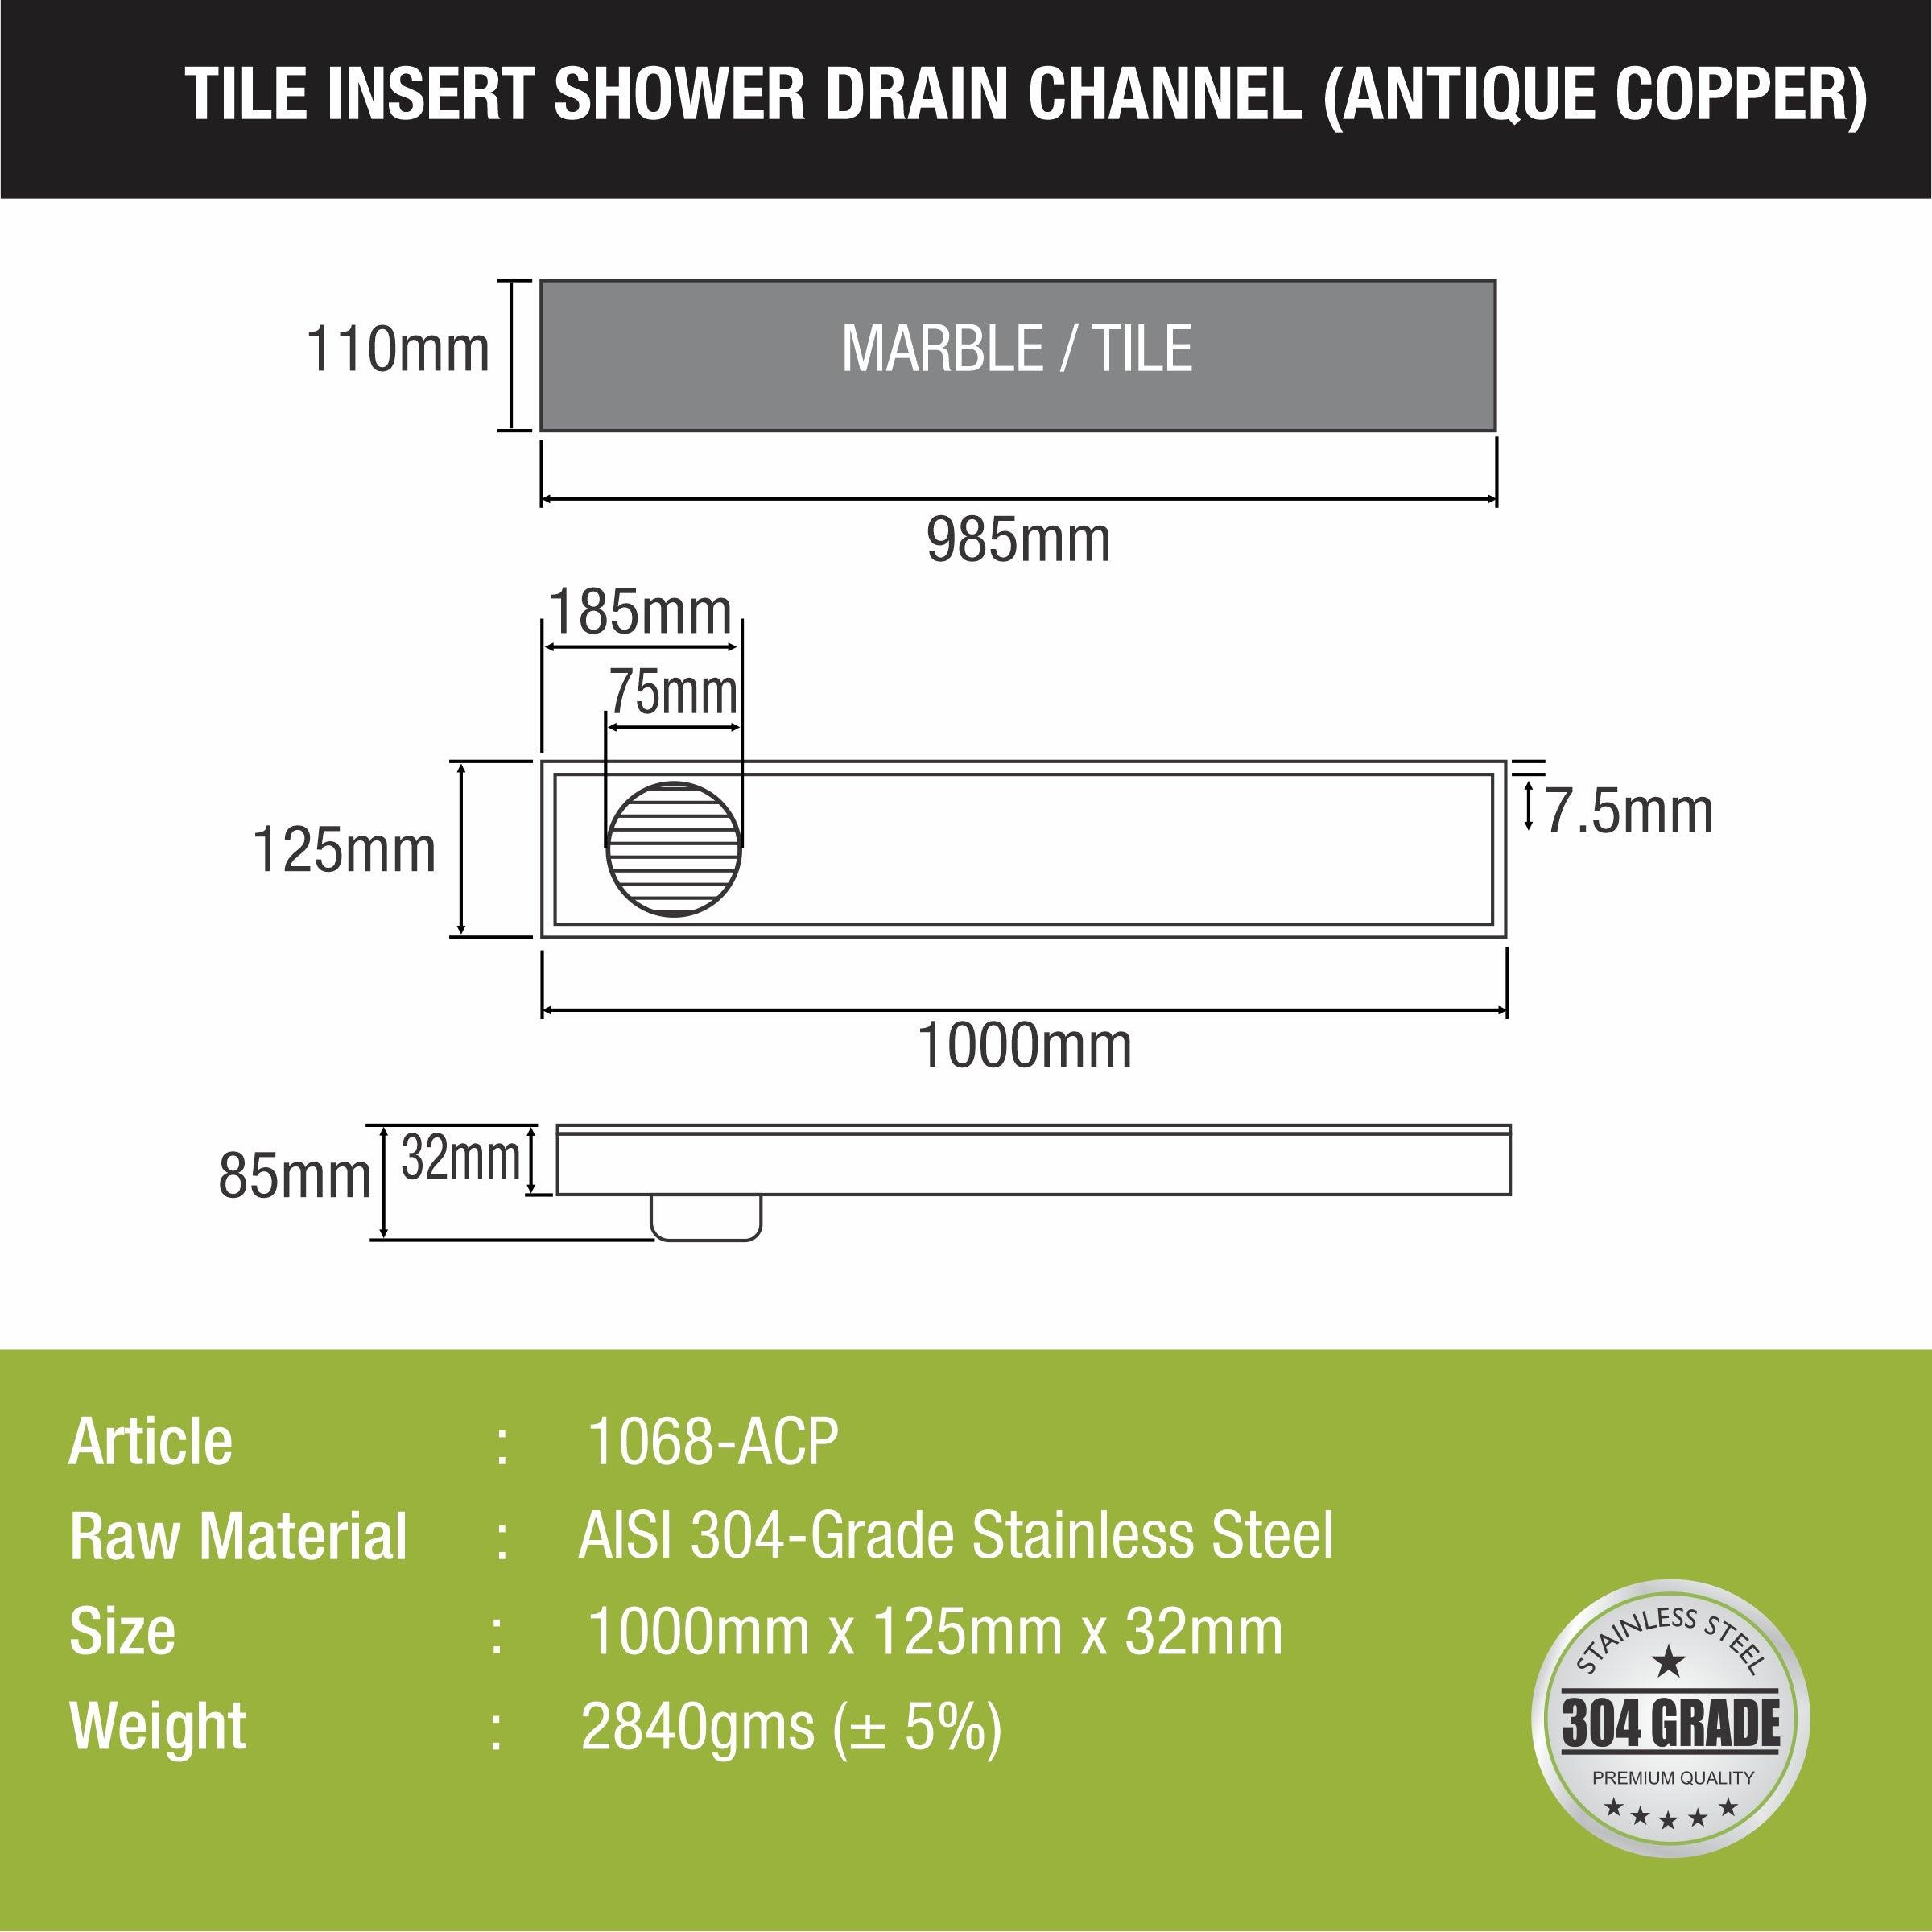 Tile Insert Shower Drain Channel - Antique Copper (40 x 5 Inches) sizes and dimensions